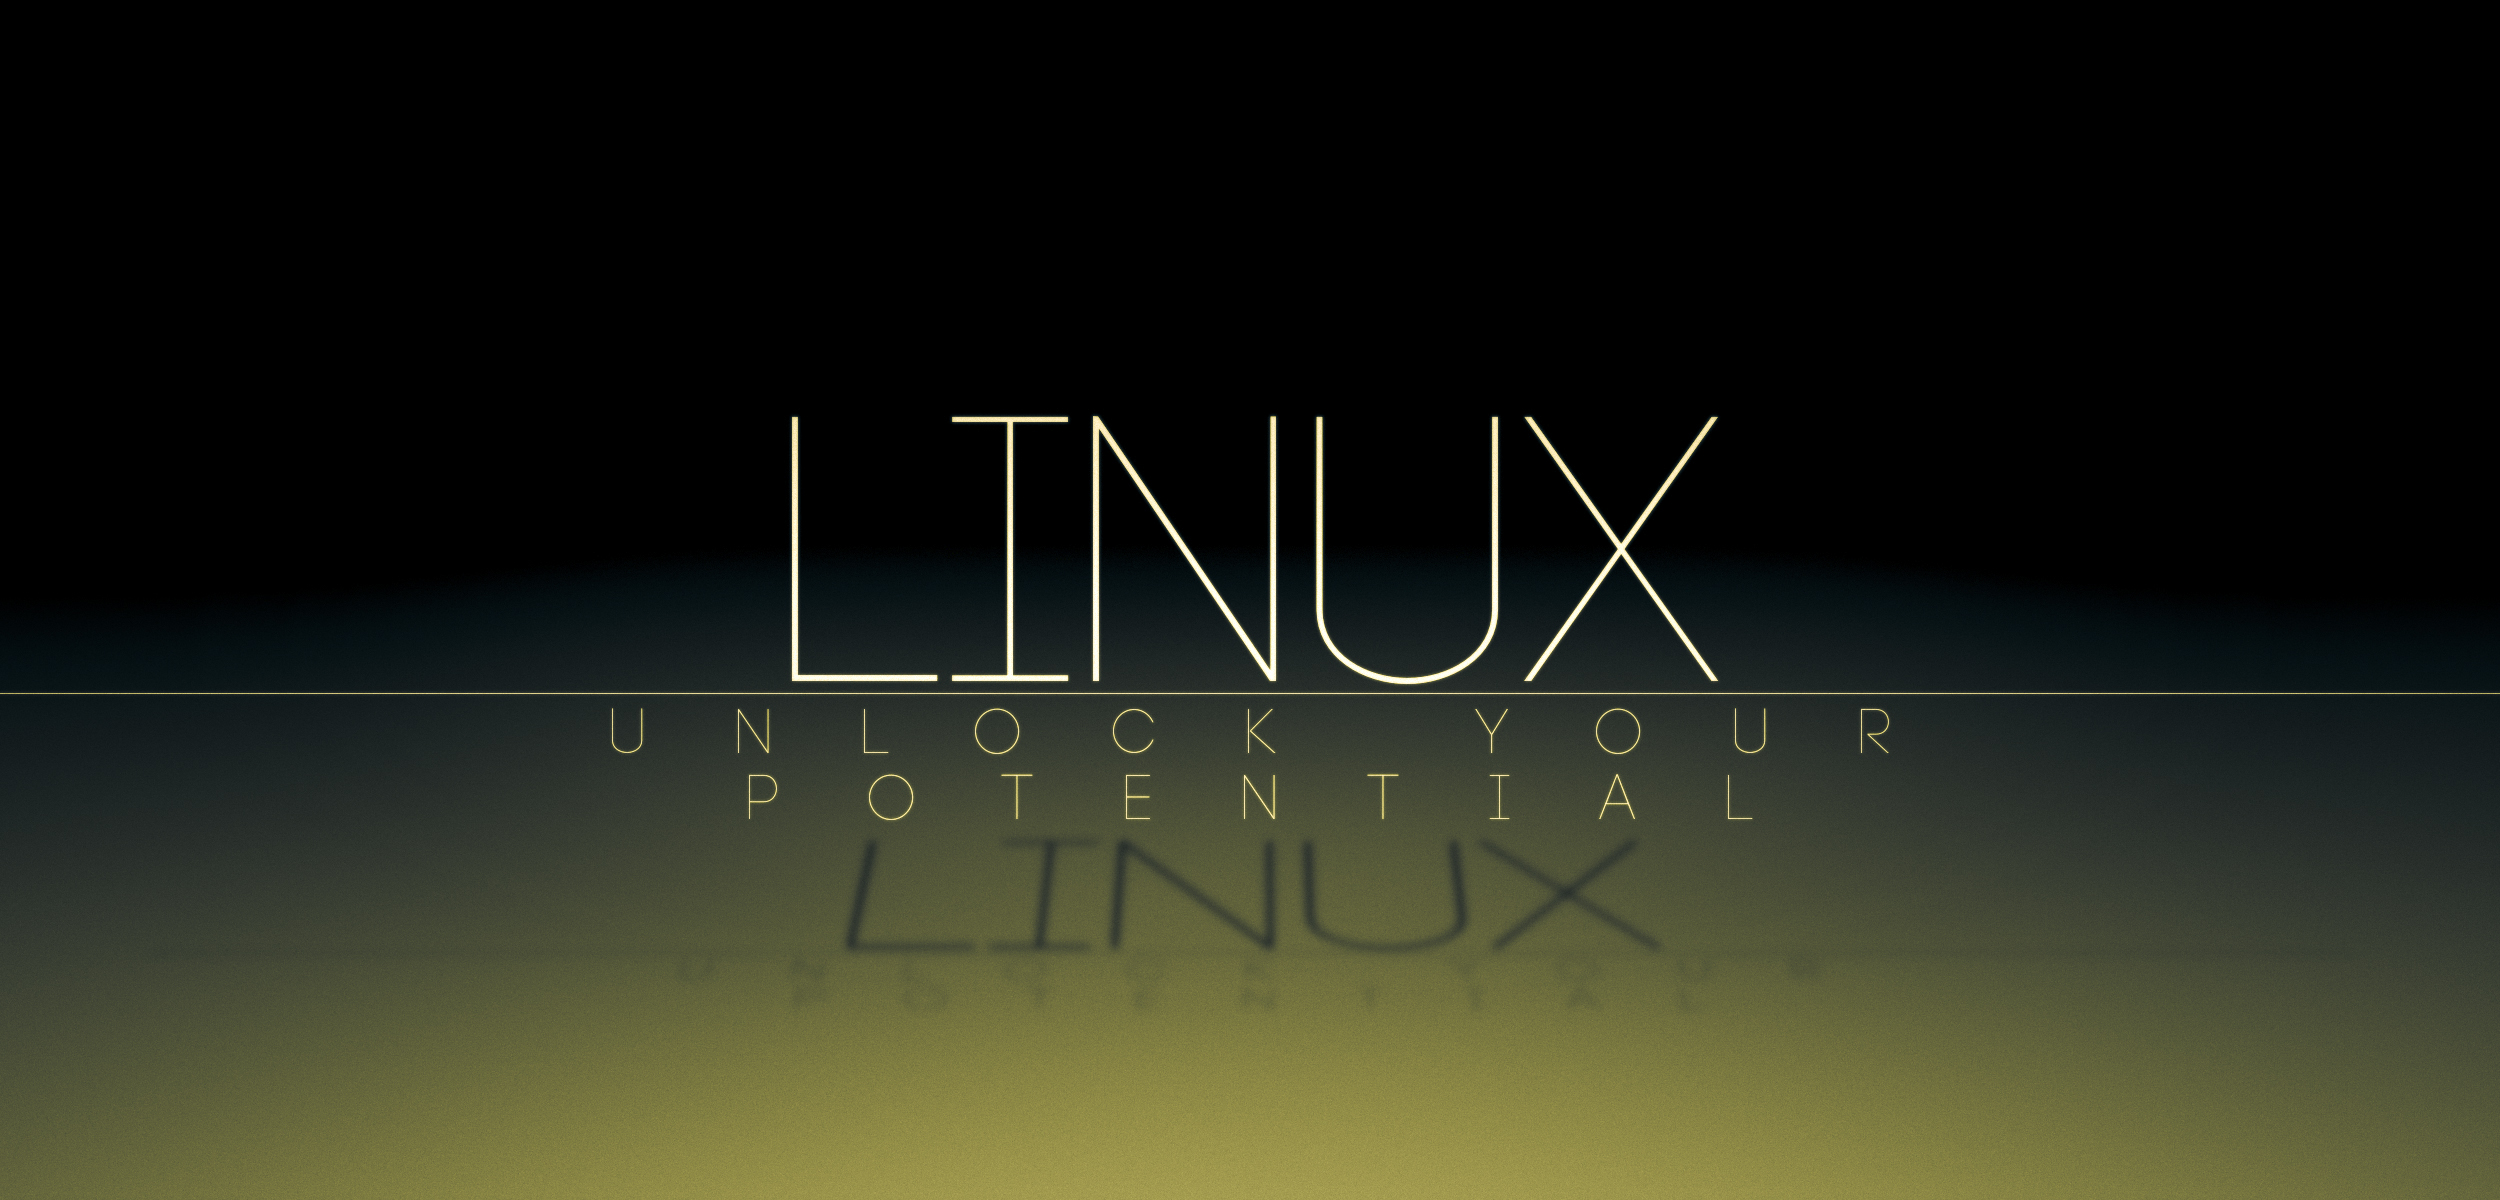 Linux word desktop wallpaper by InsainAbyss (Misc category).